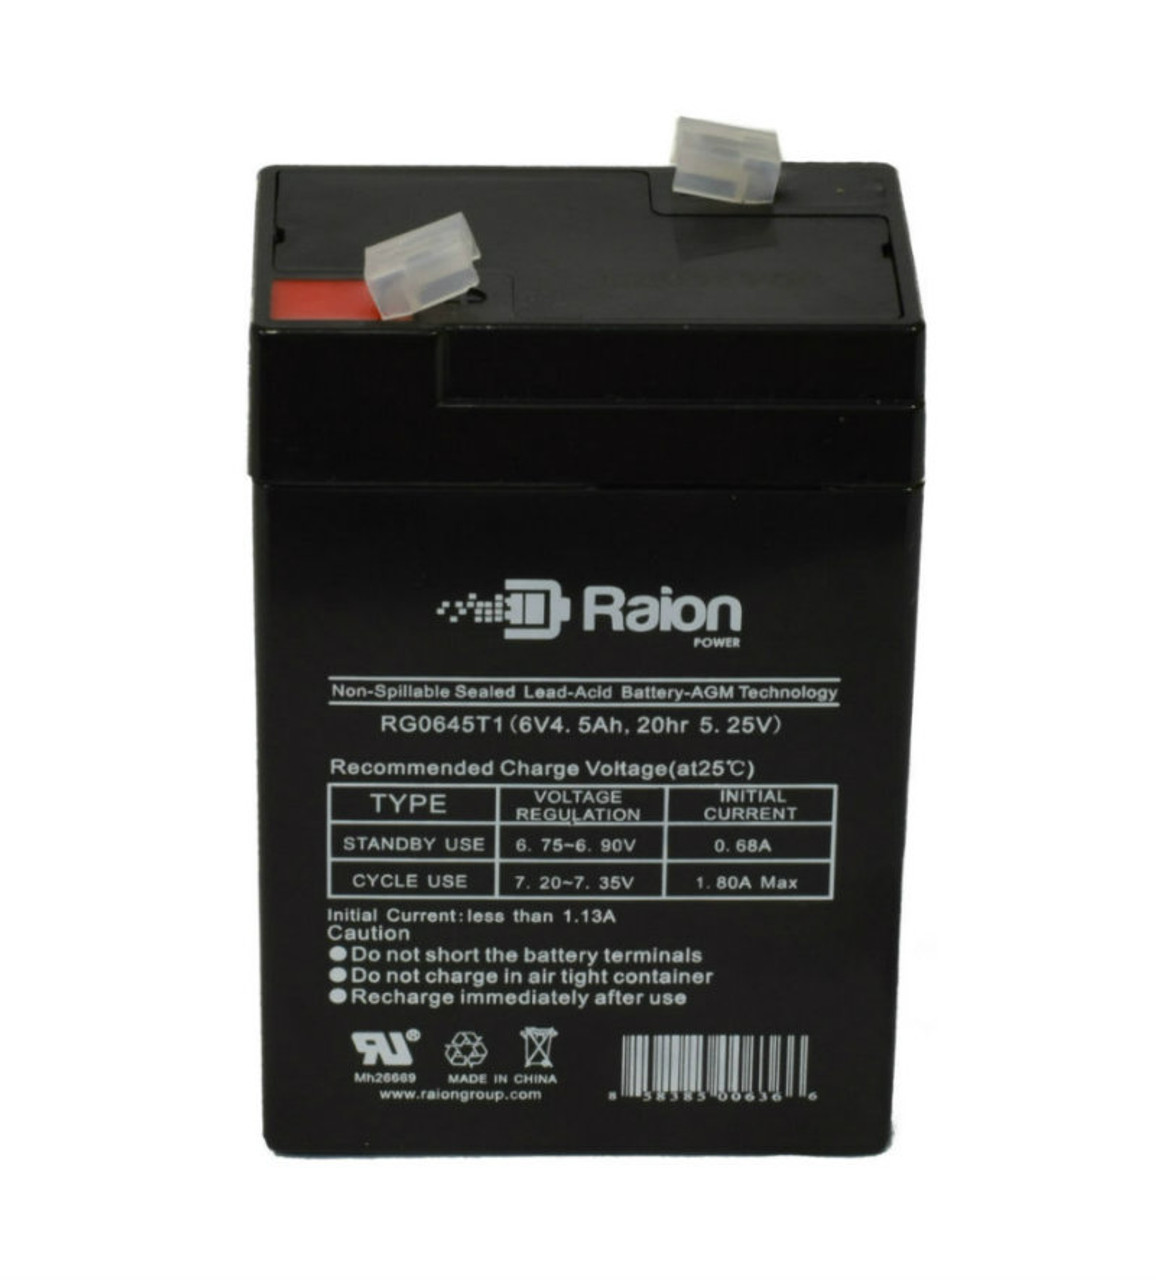 Raion Power RG0645T1 Replacement Battery Cartridge for BPOWER BPE 4.5-6